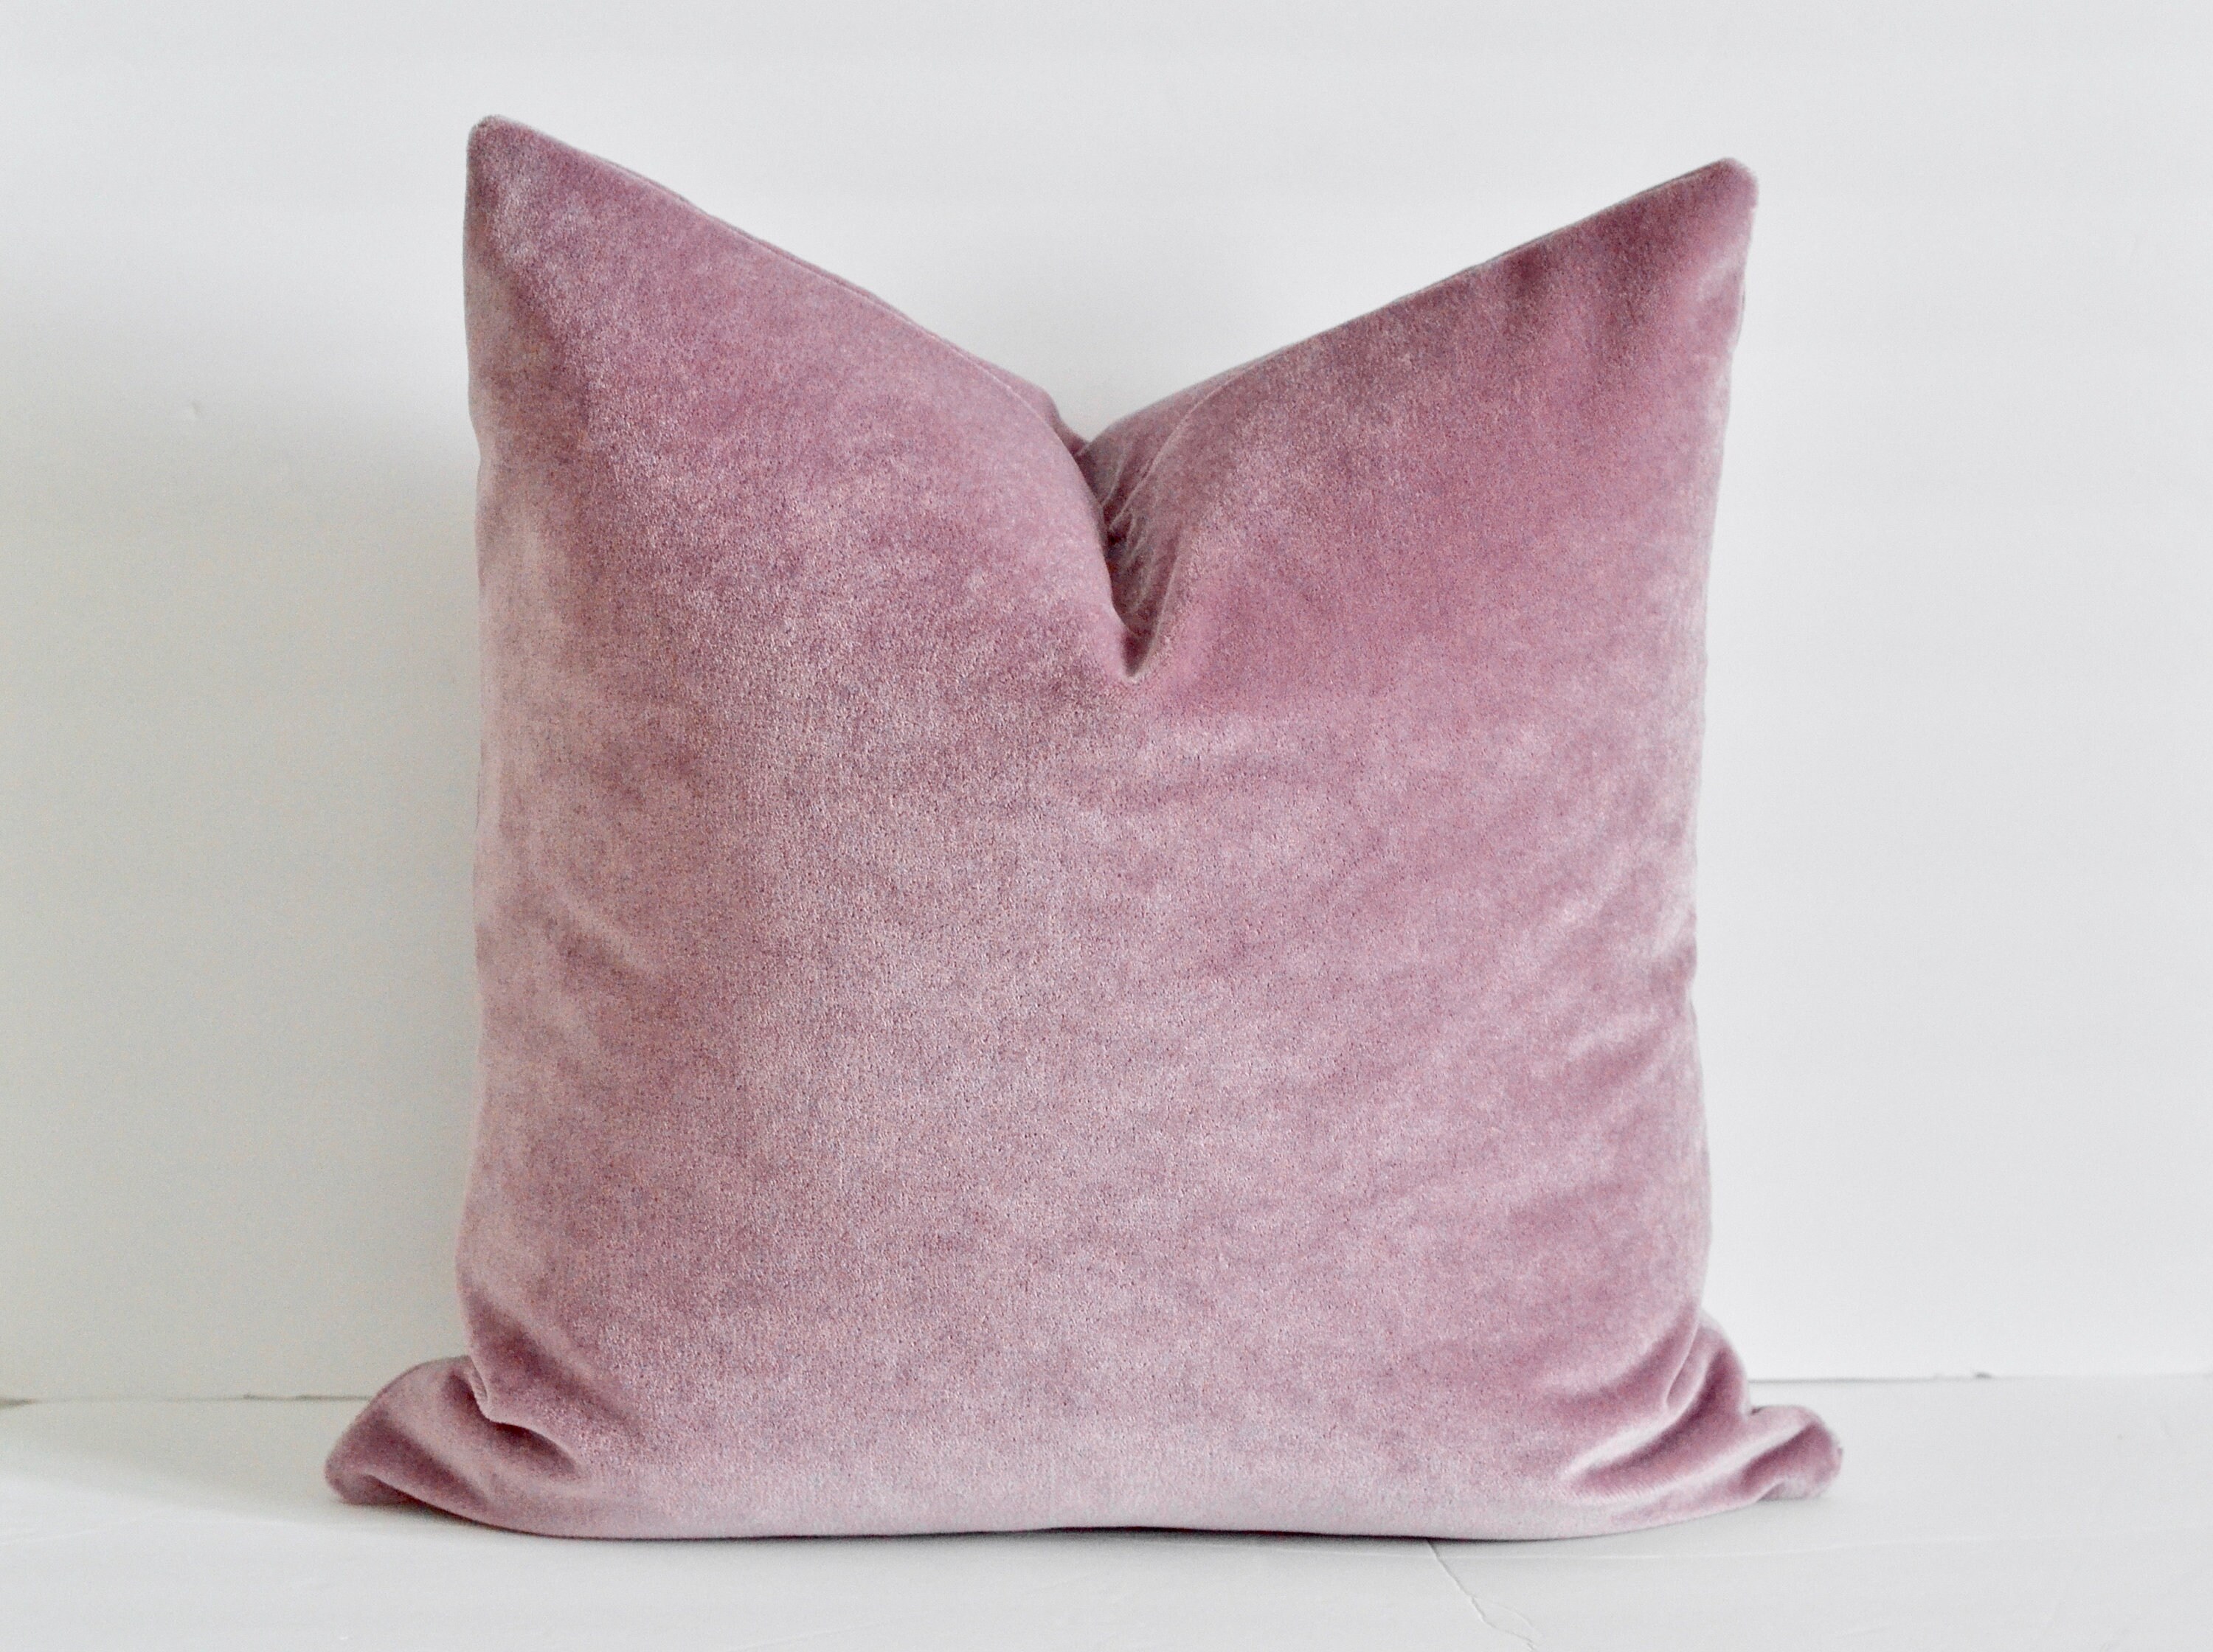  Home Brilliant Pink Pillow Covers 18x18 Set of 2 for